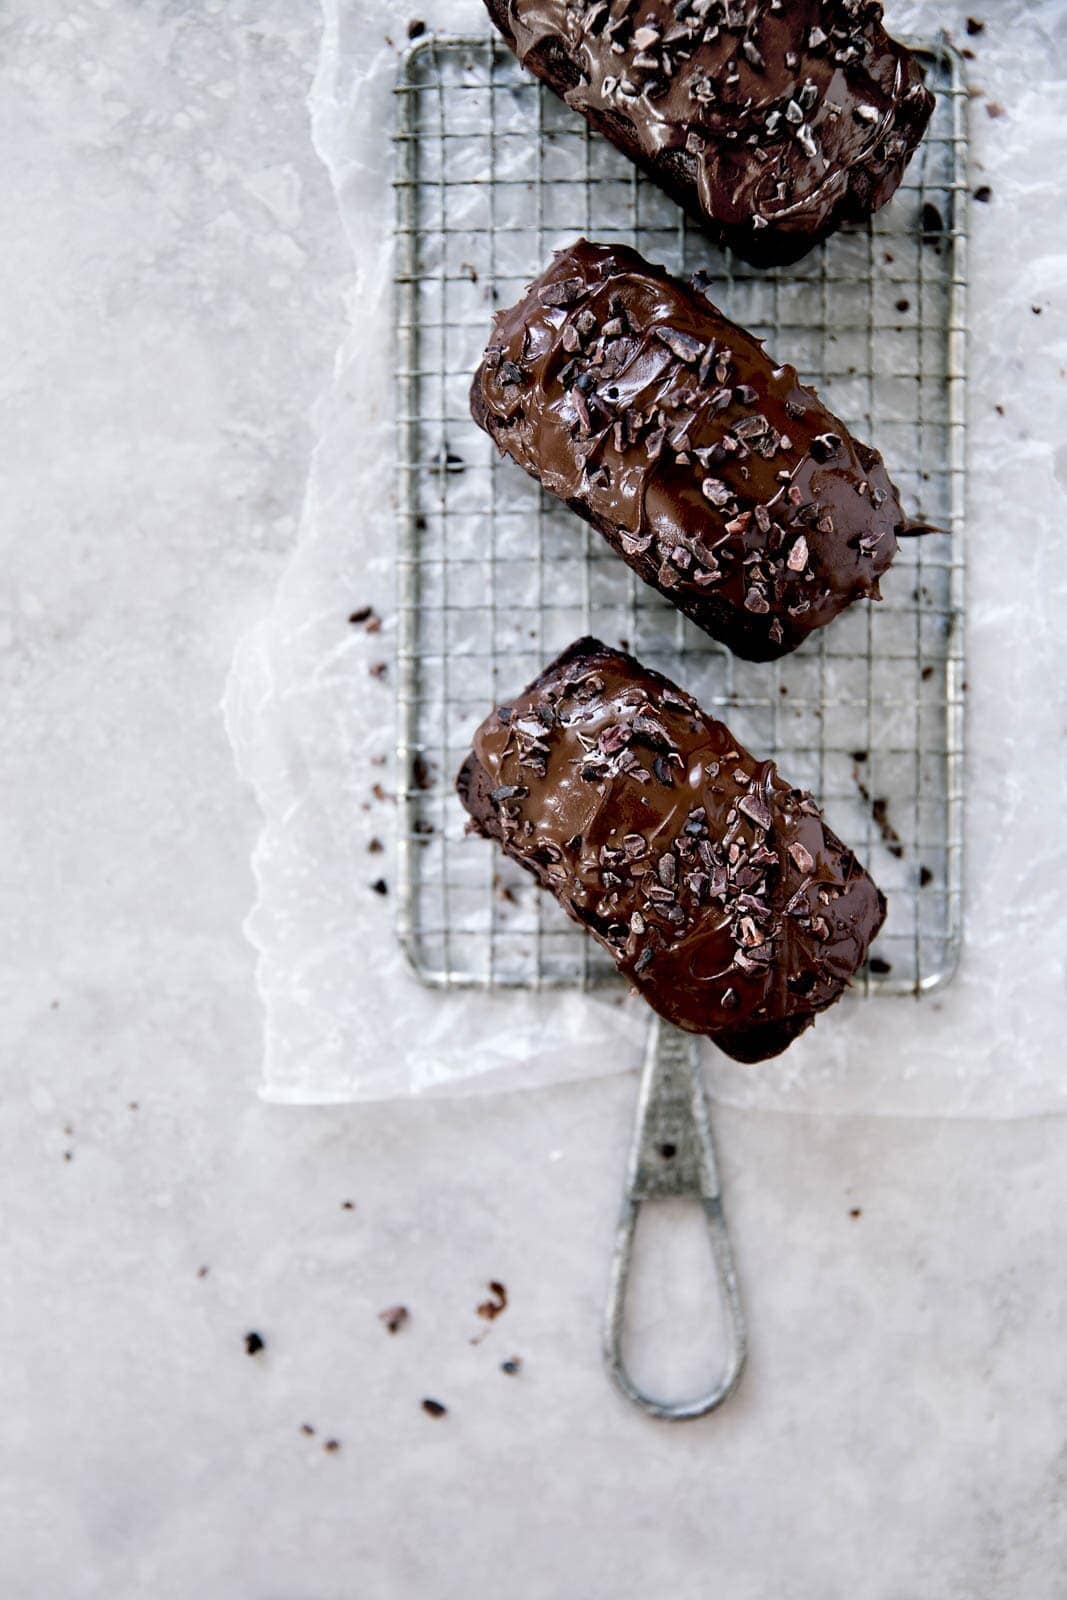 Mini chocolate zucchini breads. Because a quarter of the size is twice the fun!